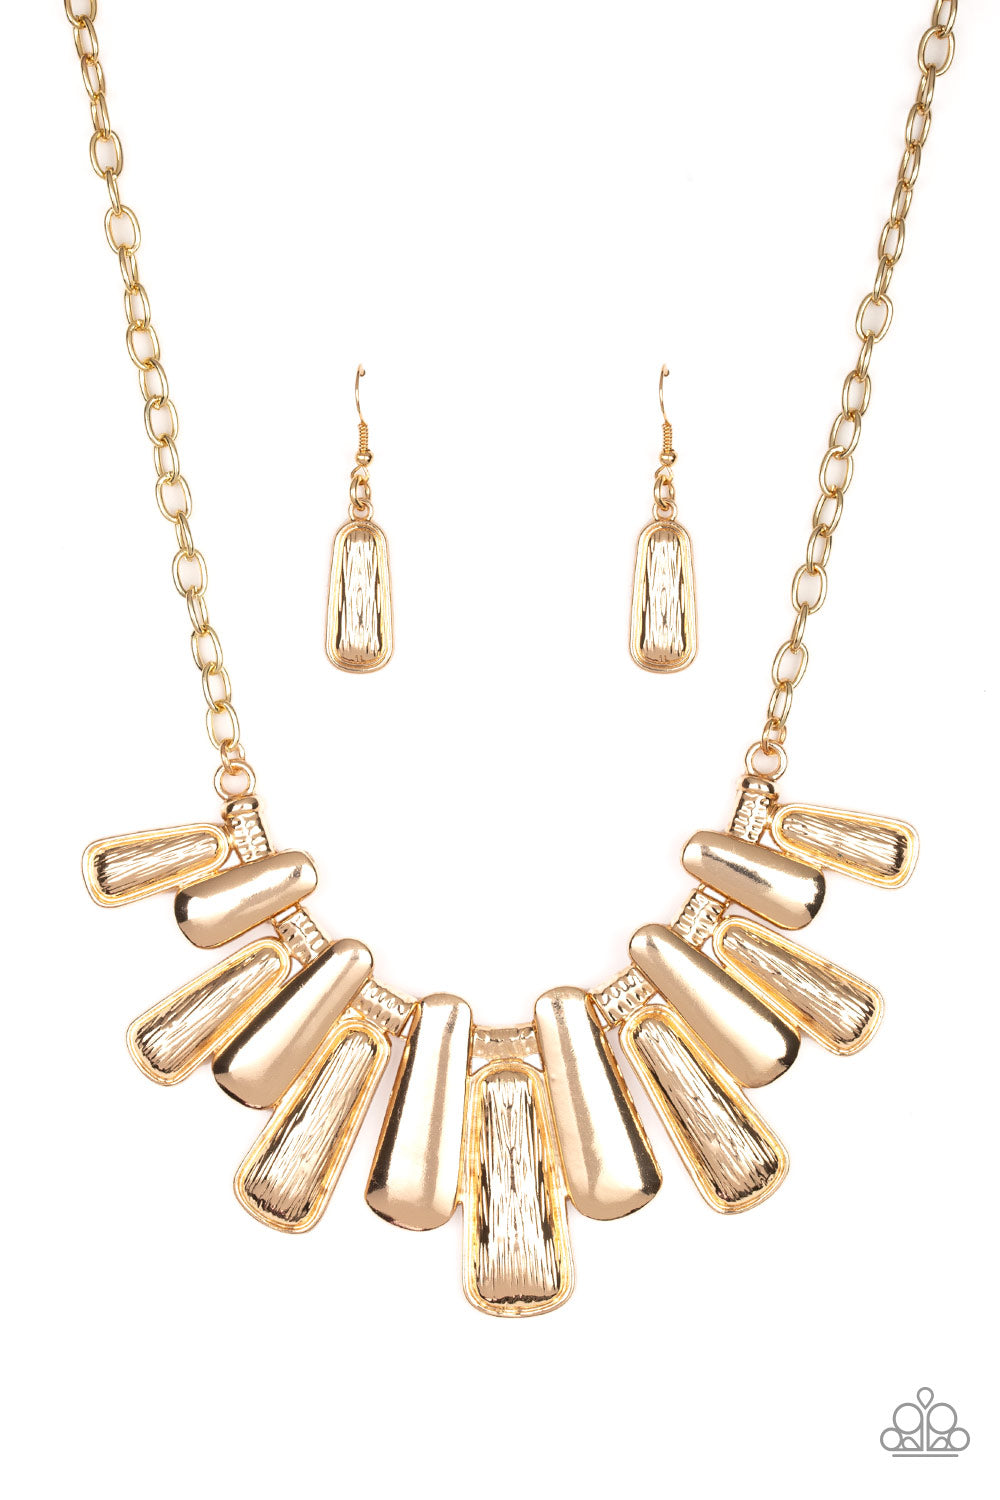 Paparazzi Accessories Mane Up - Gold Necklaces - Lady T Accessories